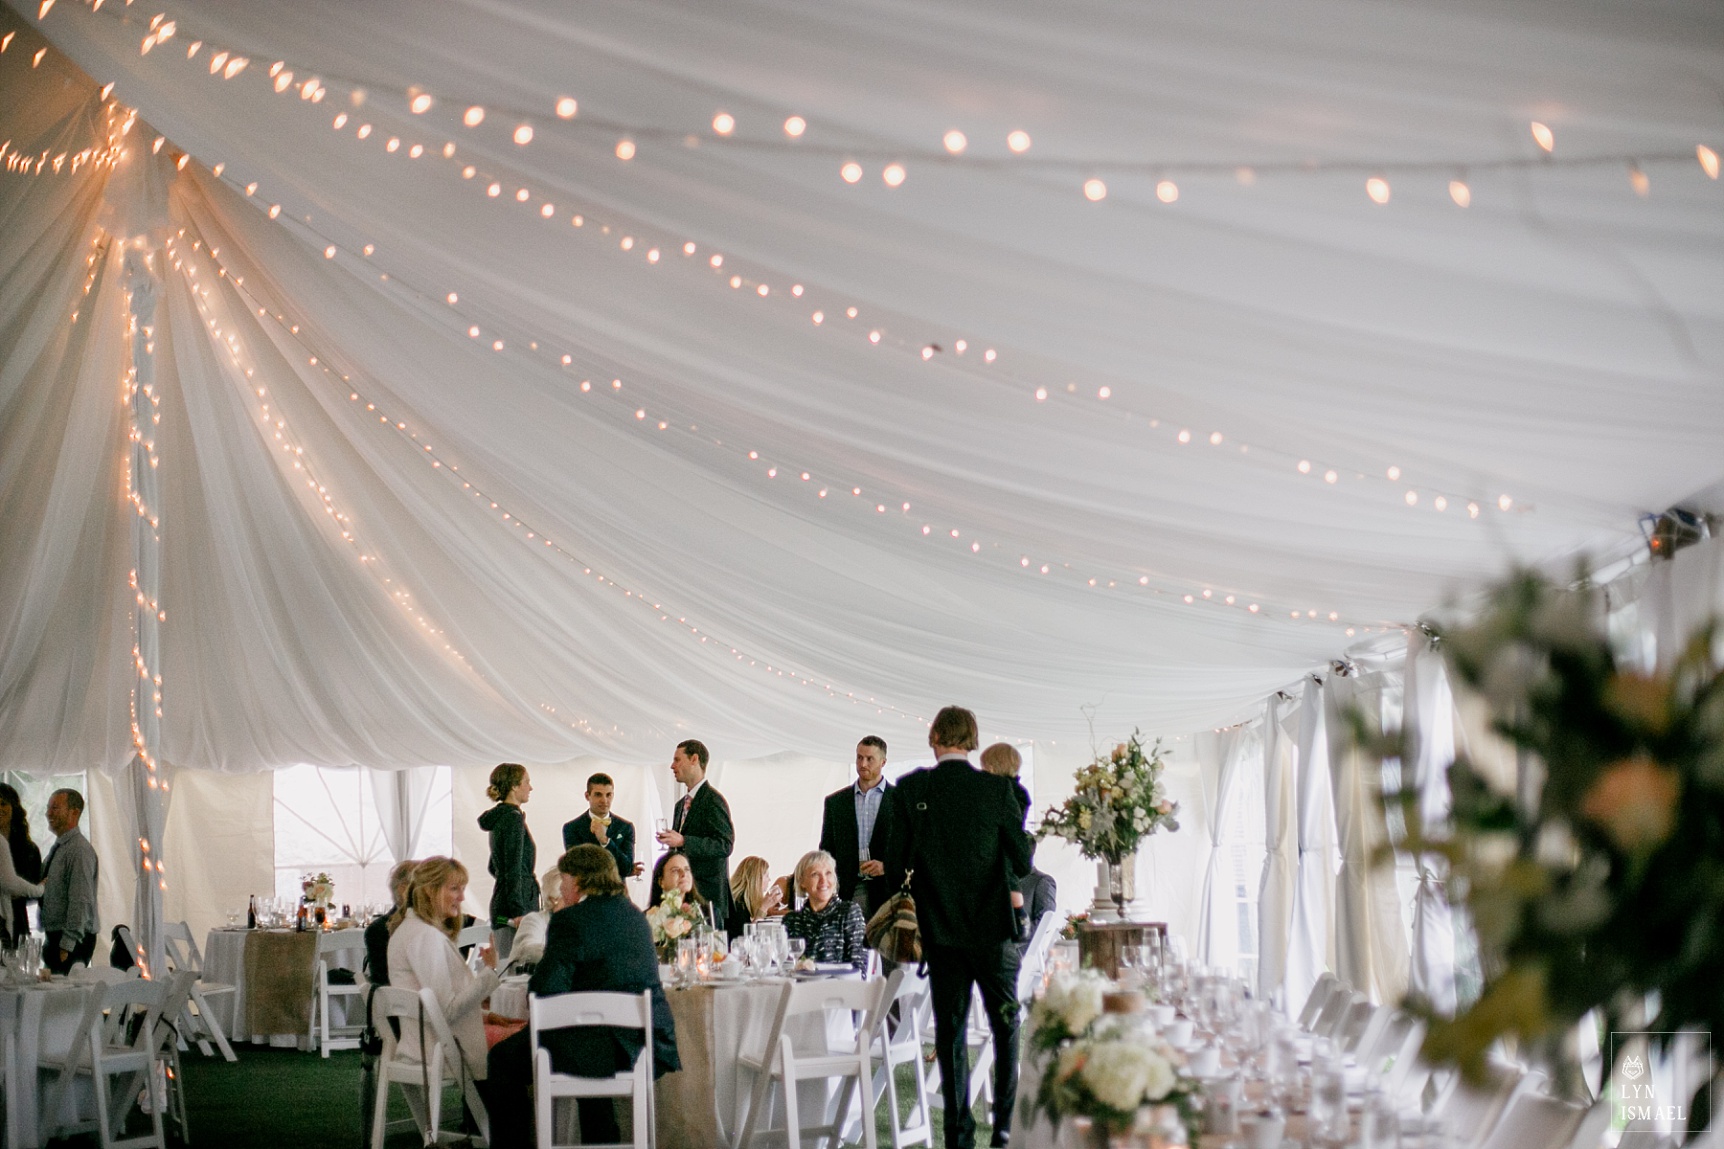 Beautifully decorated Marquis tent at a Knollwood Golf Club wedding